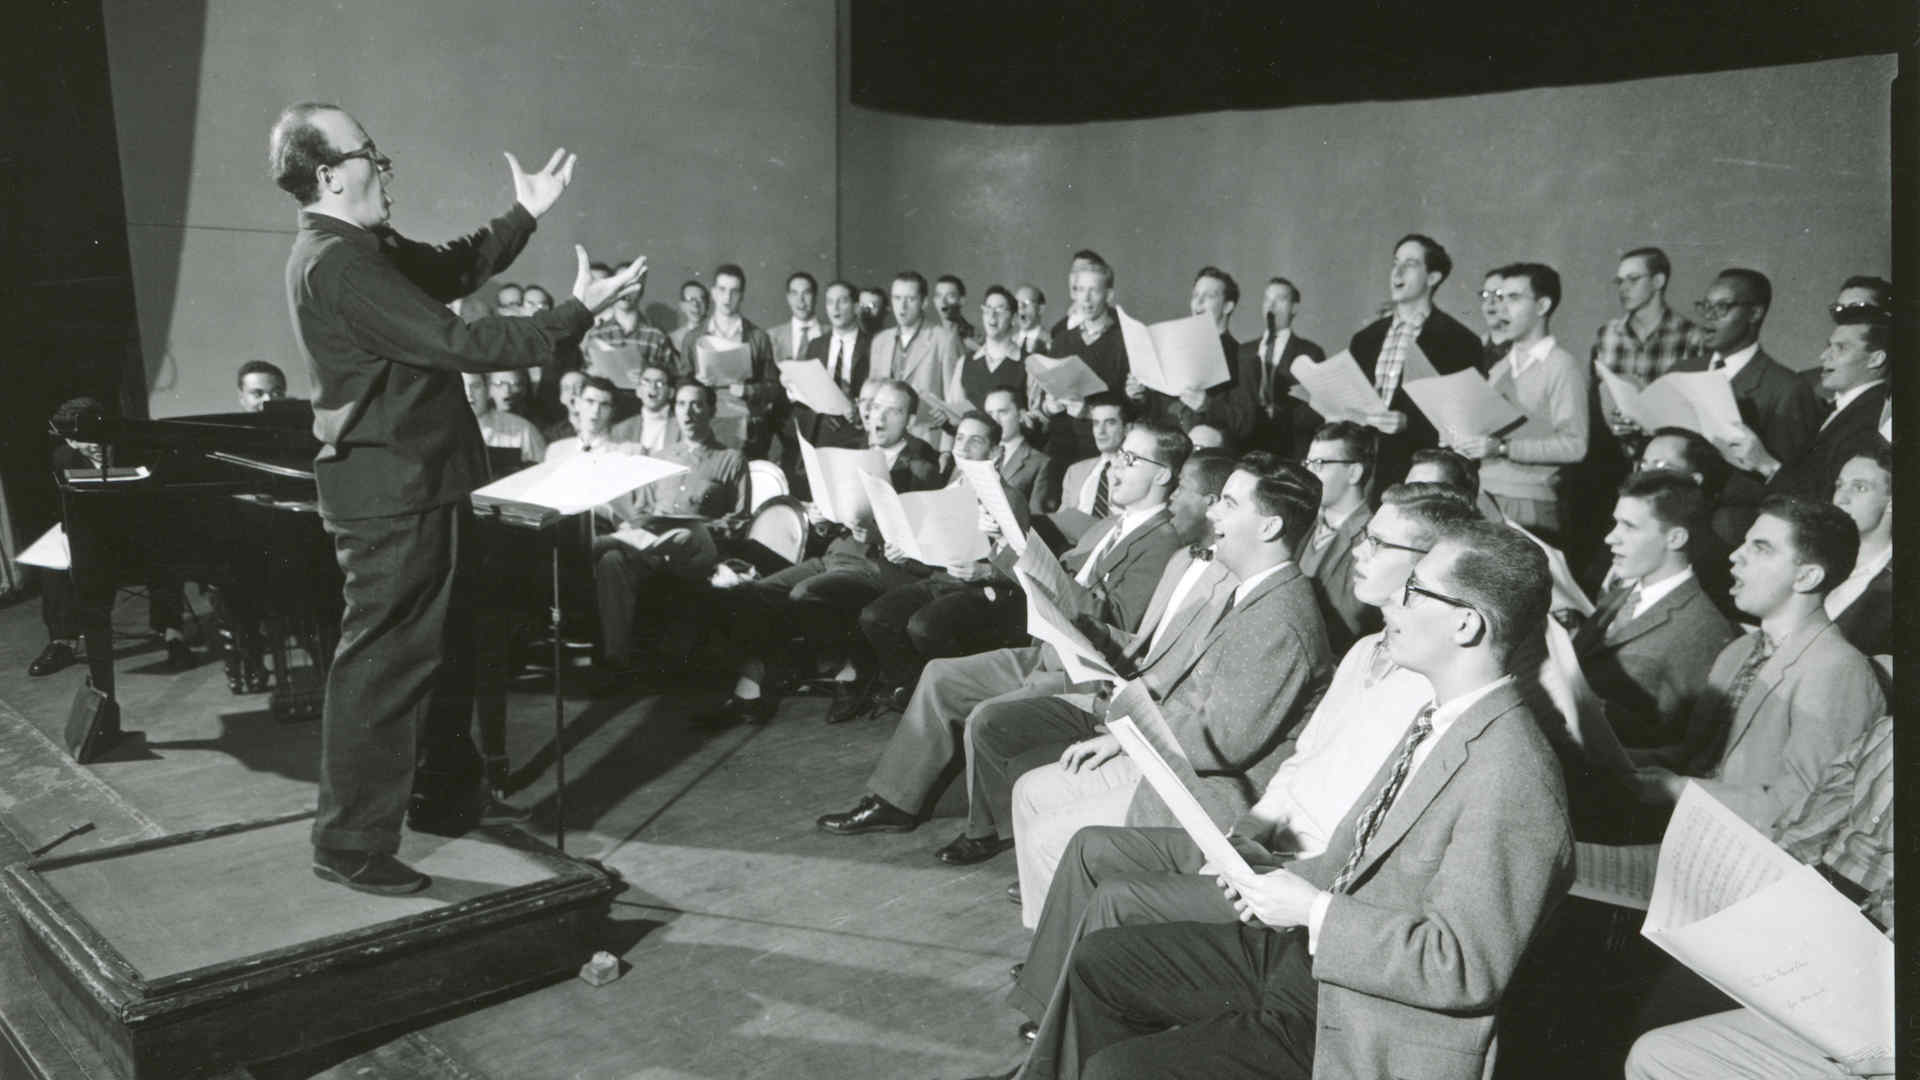 Archival (black and white) photo from a choir rehearsal of five rows of men in a semicircle. The conductor makes a passionate expression.